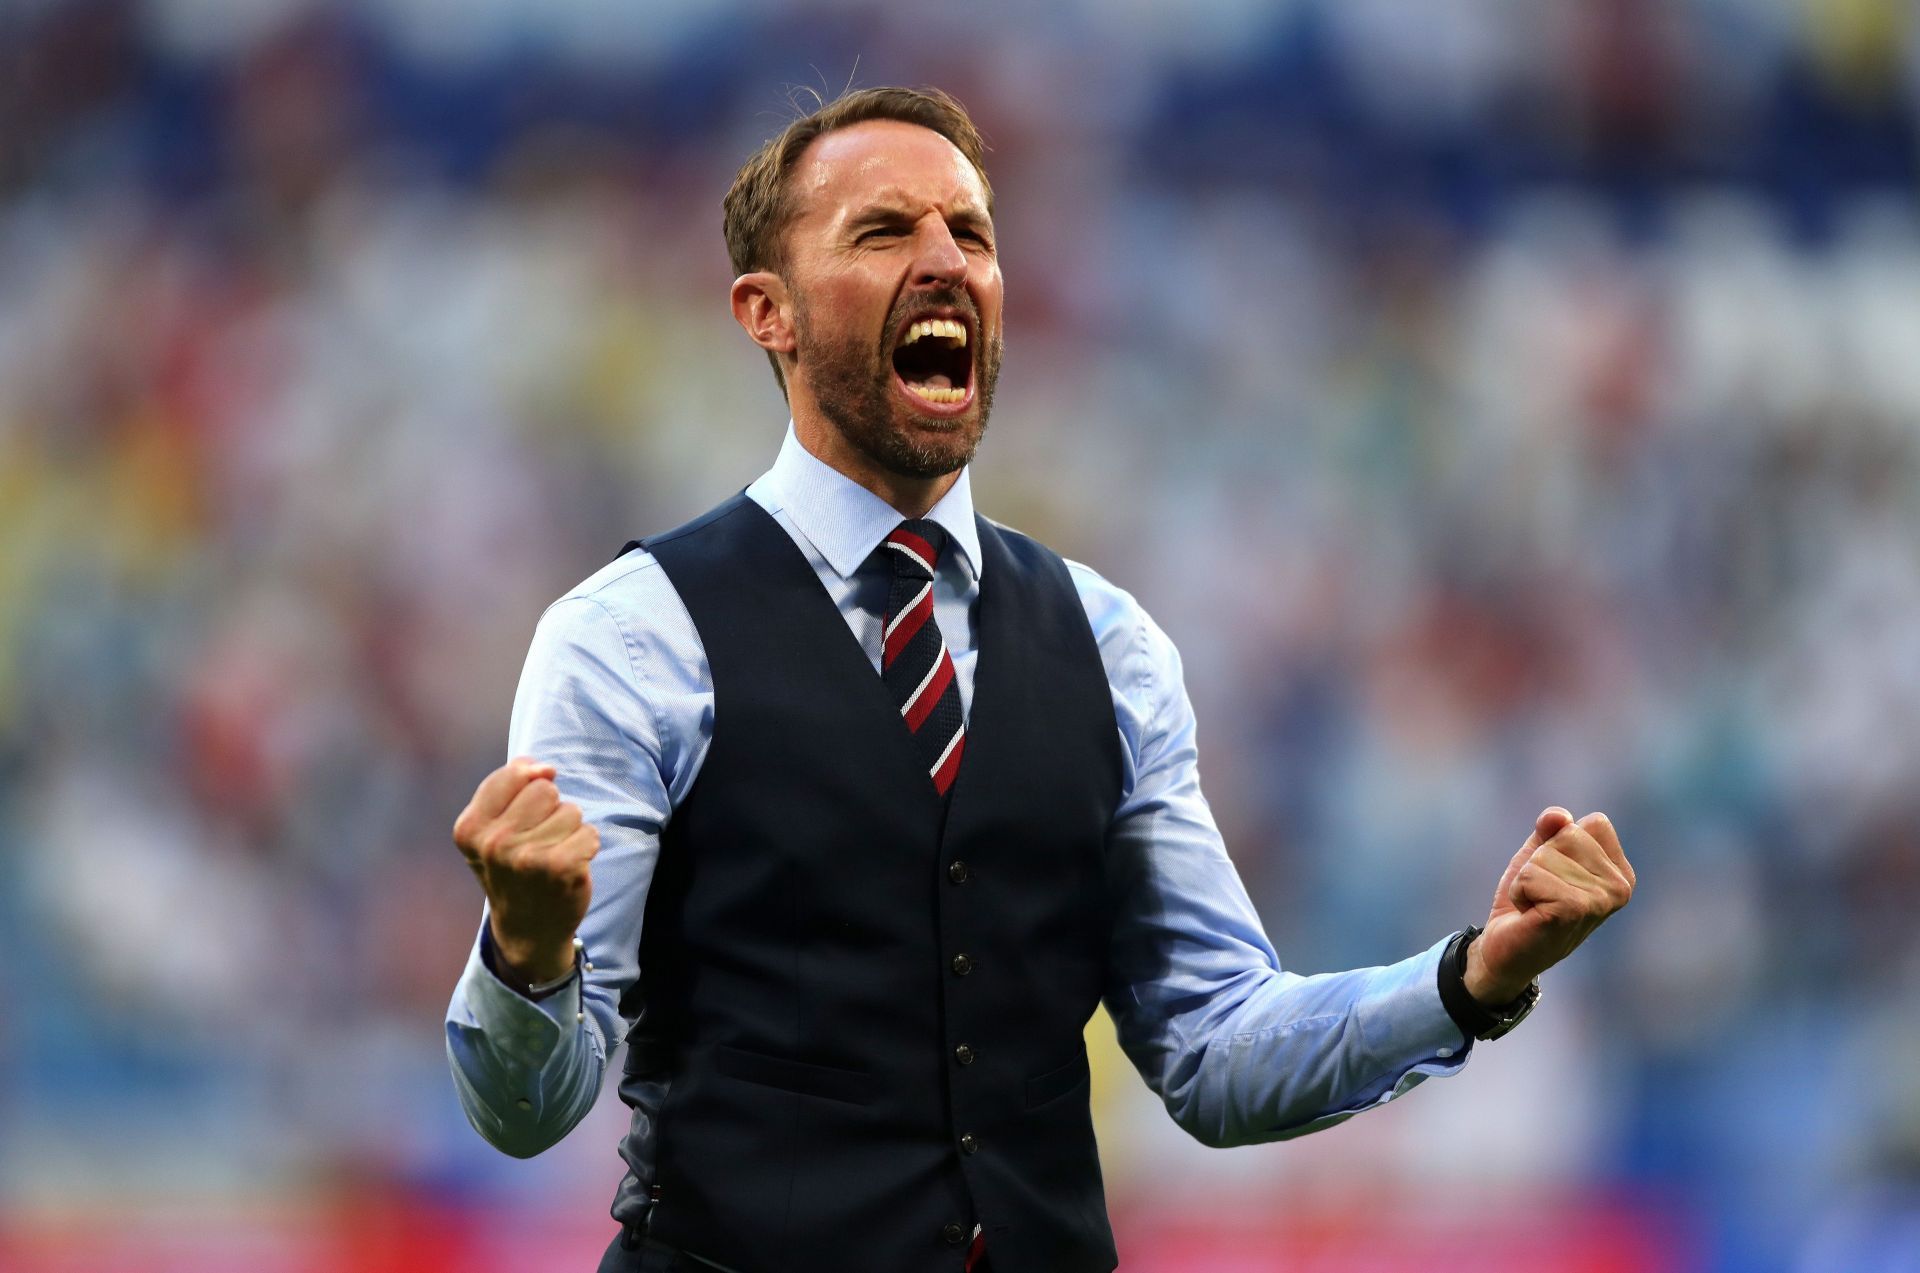 Danny Murphy suggested Gareth Southgate would have been ideal for Manchester United.